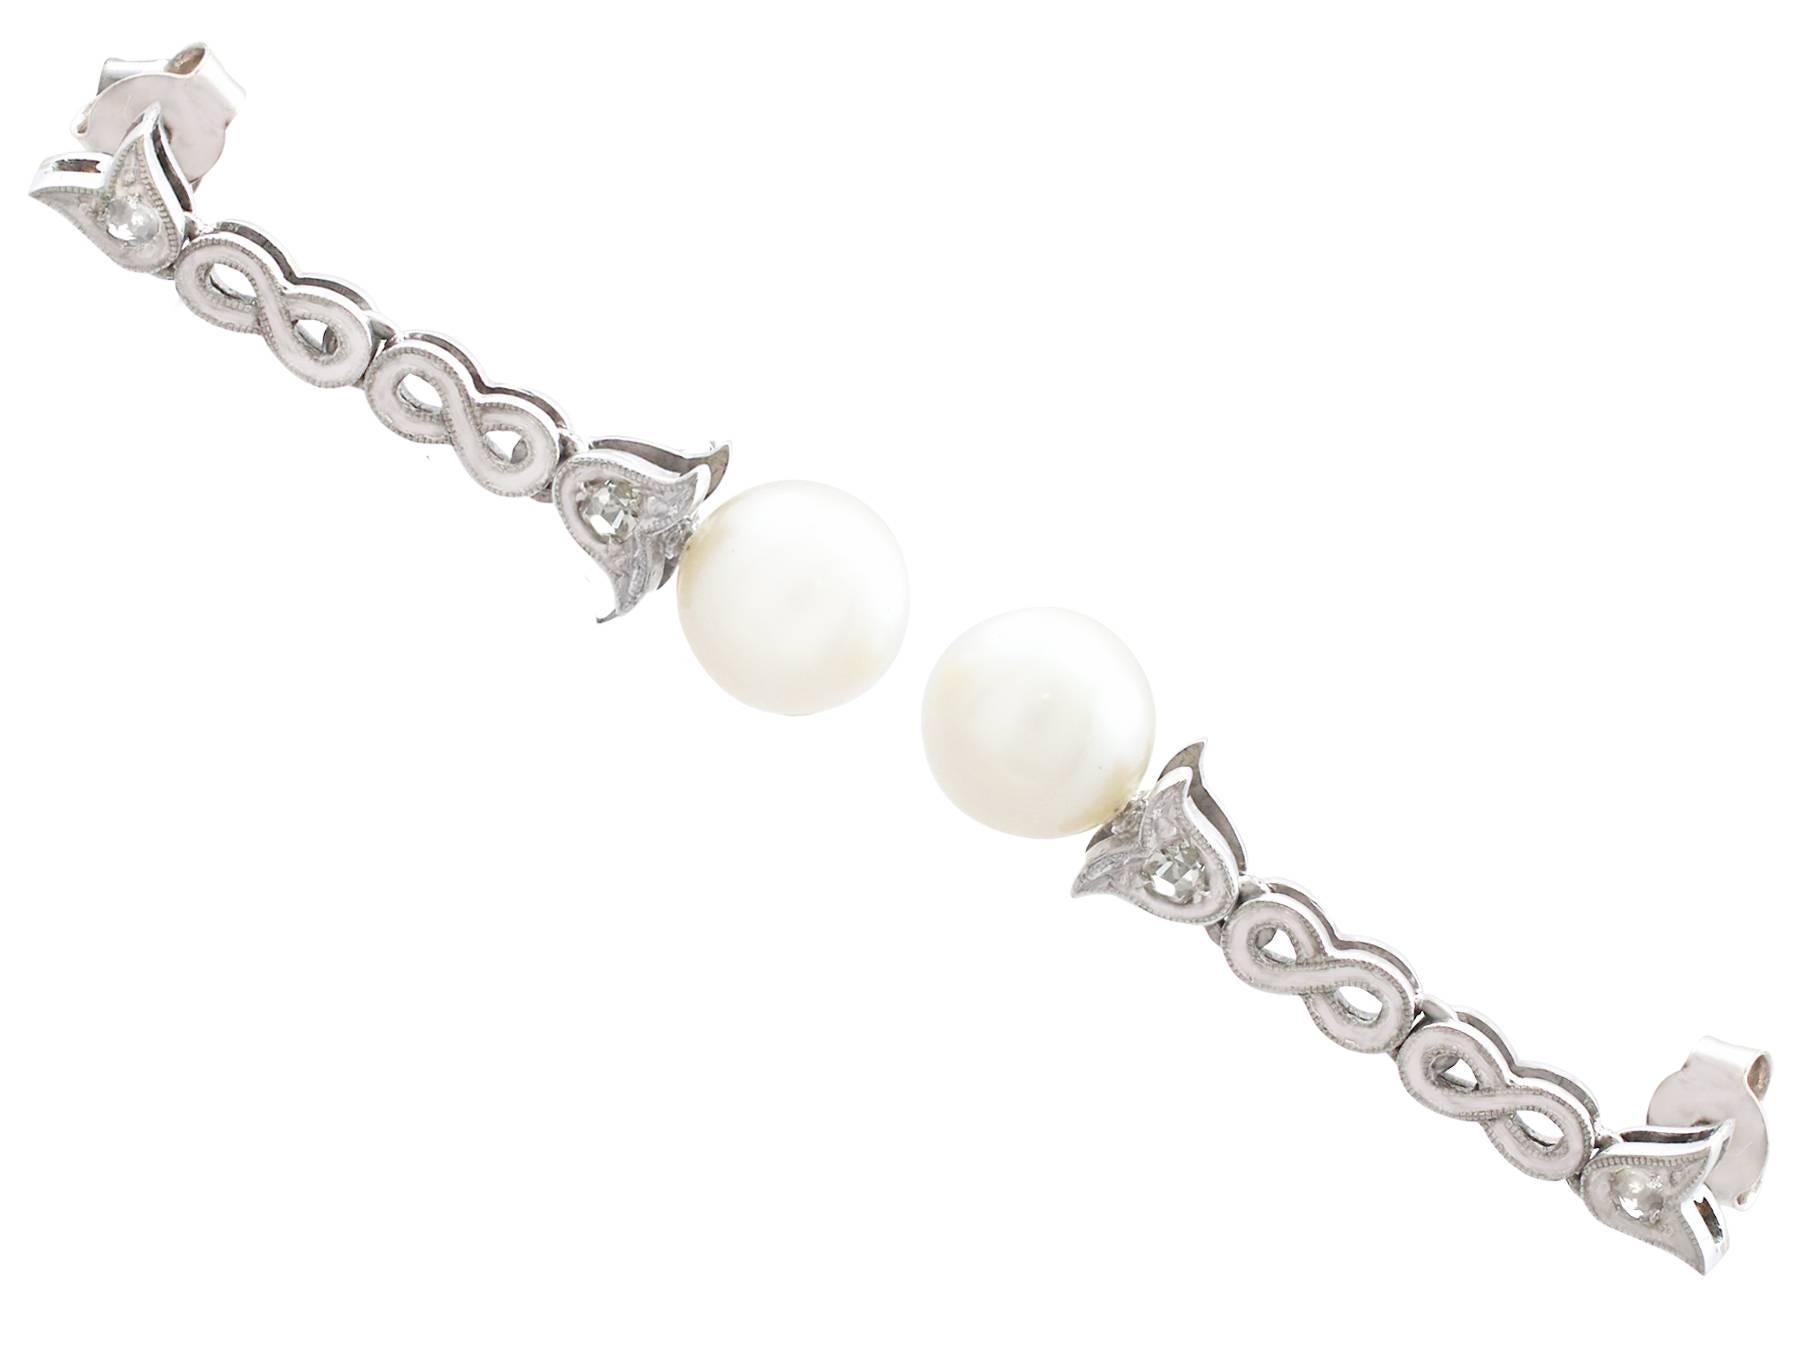 An impressive pair of cultured pearl and 0.10 carat diamond, 14 karat white gold drop earrings; part of our diverse pearl jewellery and estate jewelry collections.

These fine and impressive pearl drop earrings have been crafted in 14k white